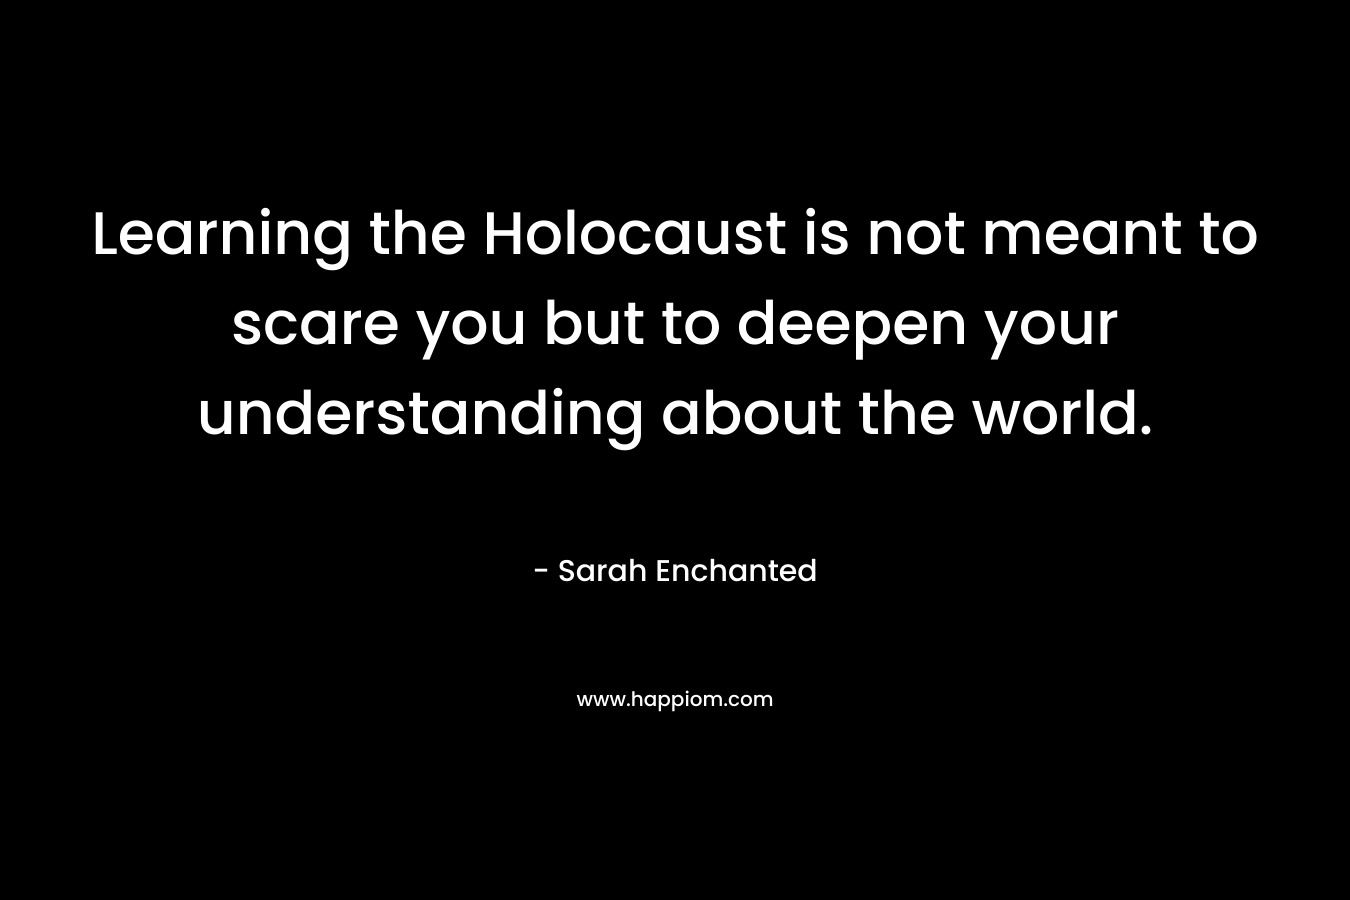 Learning the Holocaust is not meant to scare you but to deepen your understanding about the world.